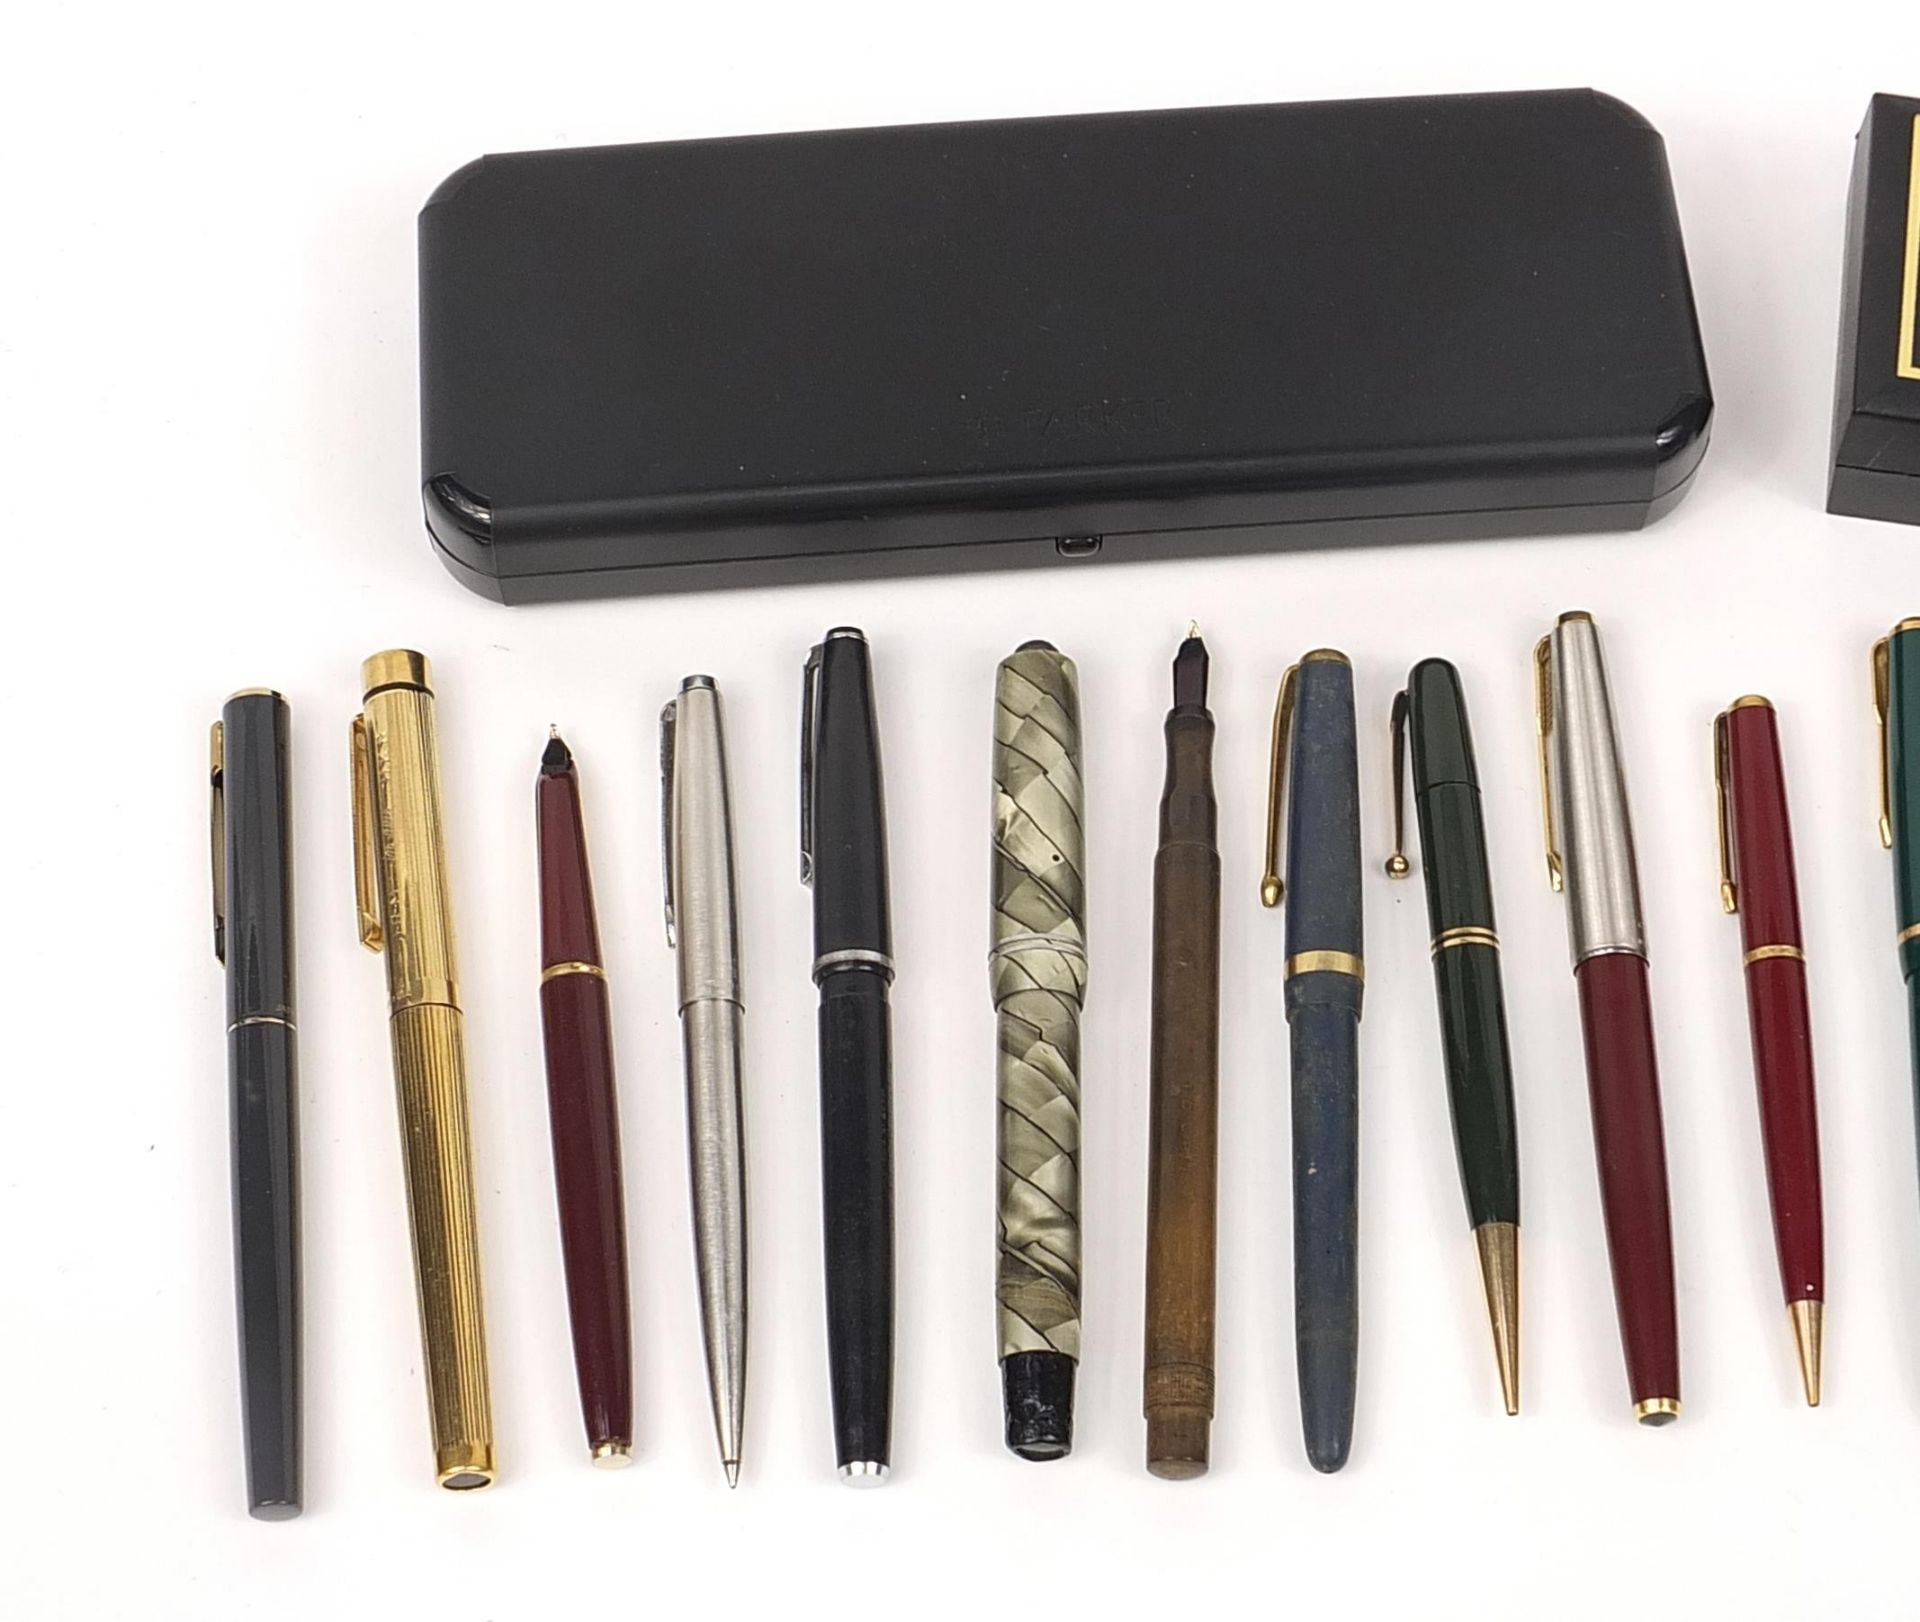 Vintage and later pens, some with gold nibs including Parker, Watermans and Calibre - Image 2 of 3